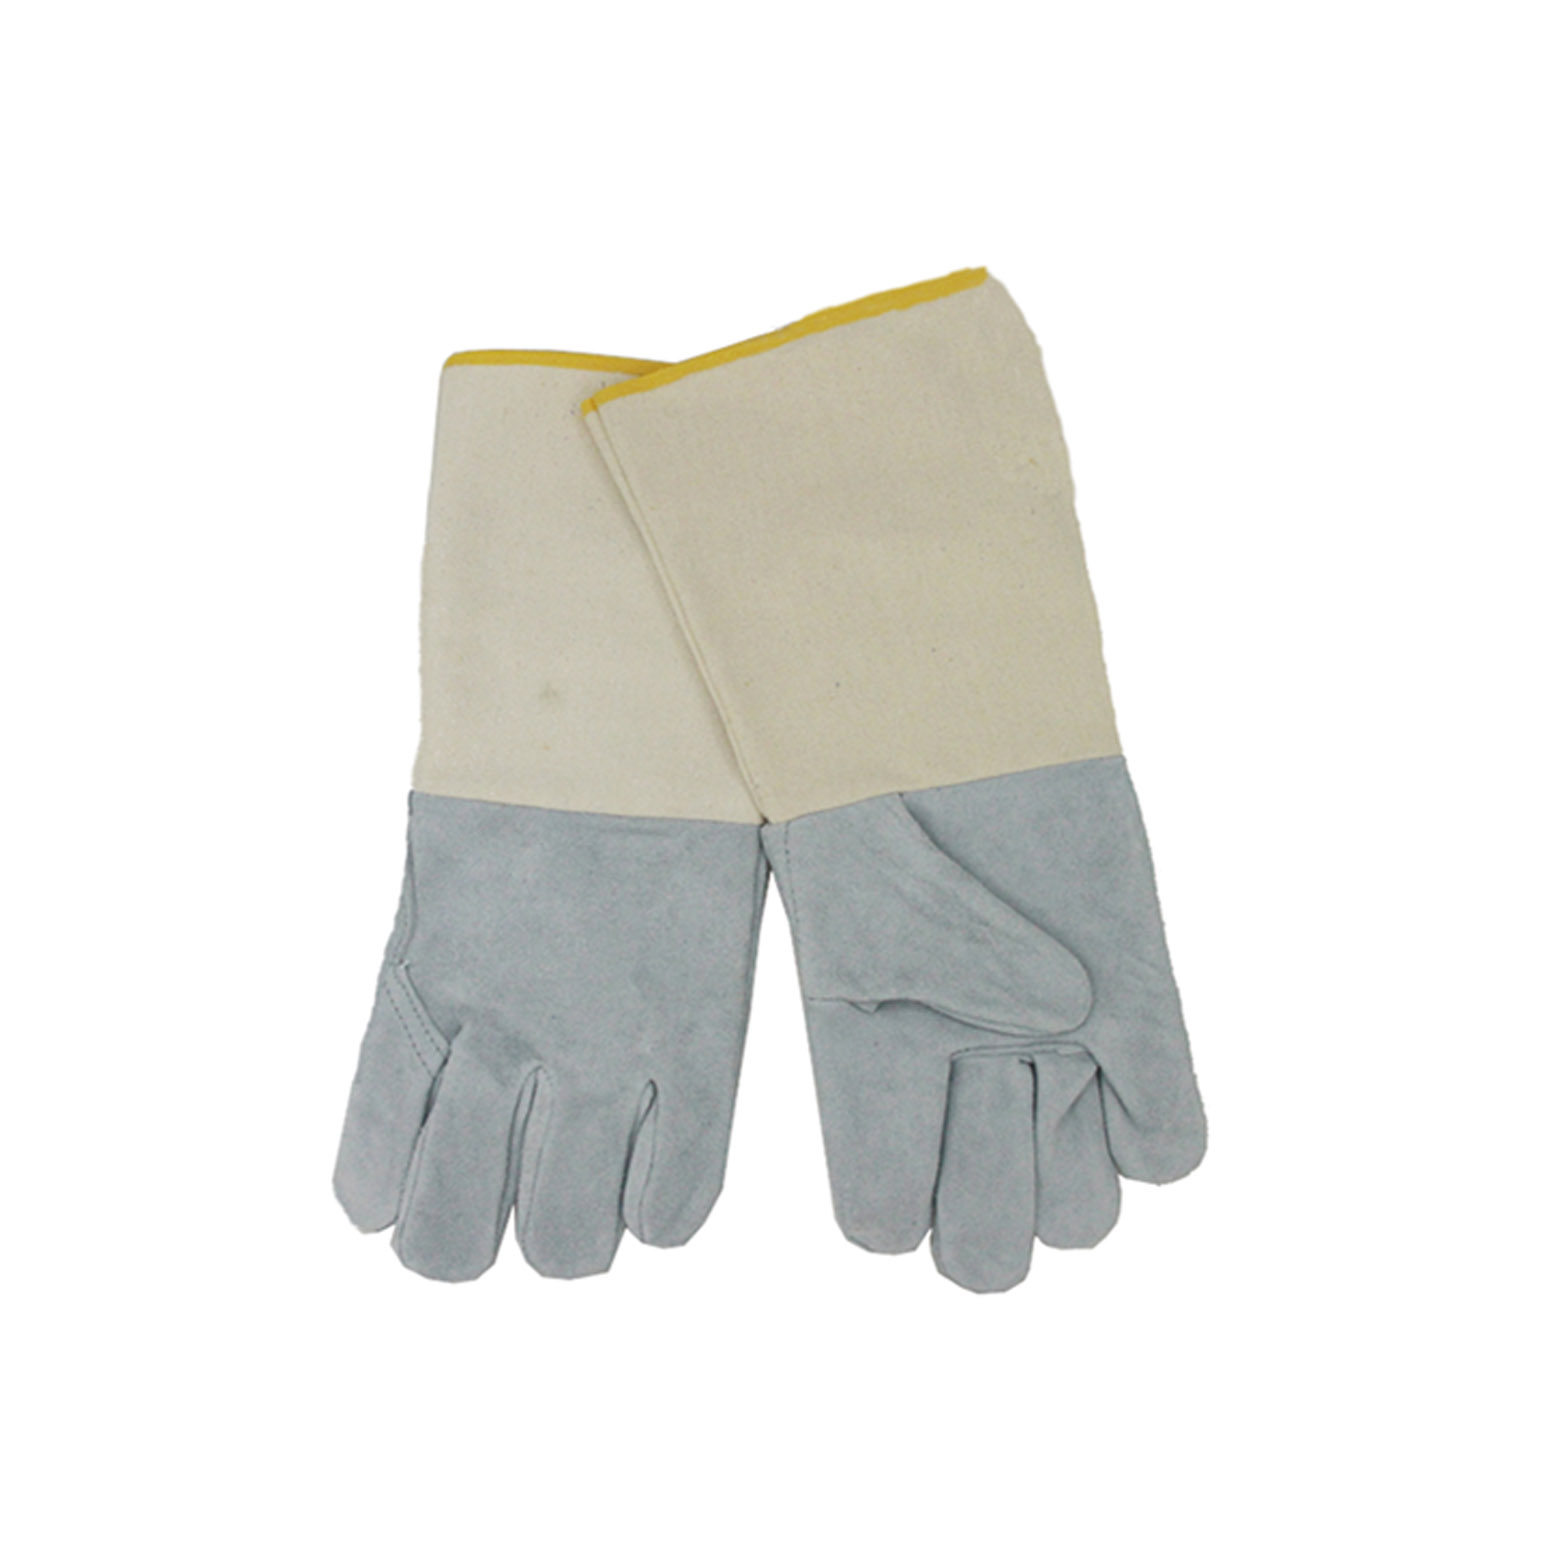 Get Star Weld Full leather canvas sleeves gloves